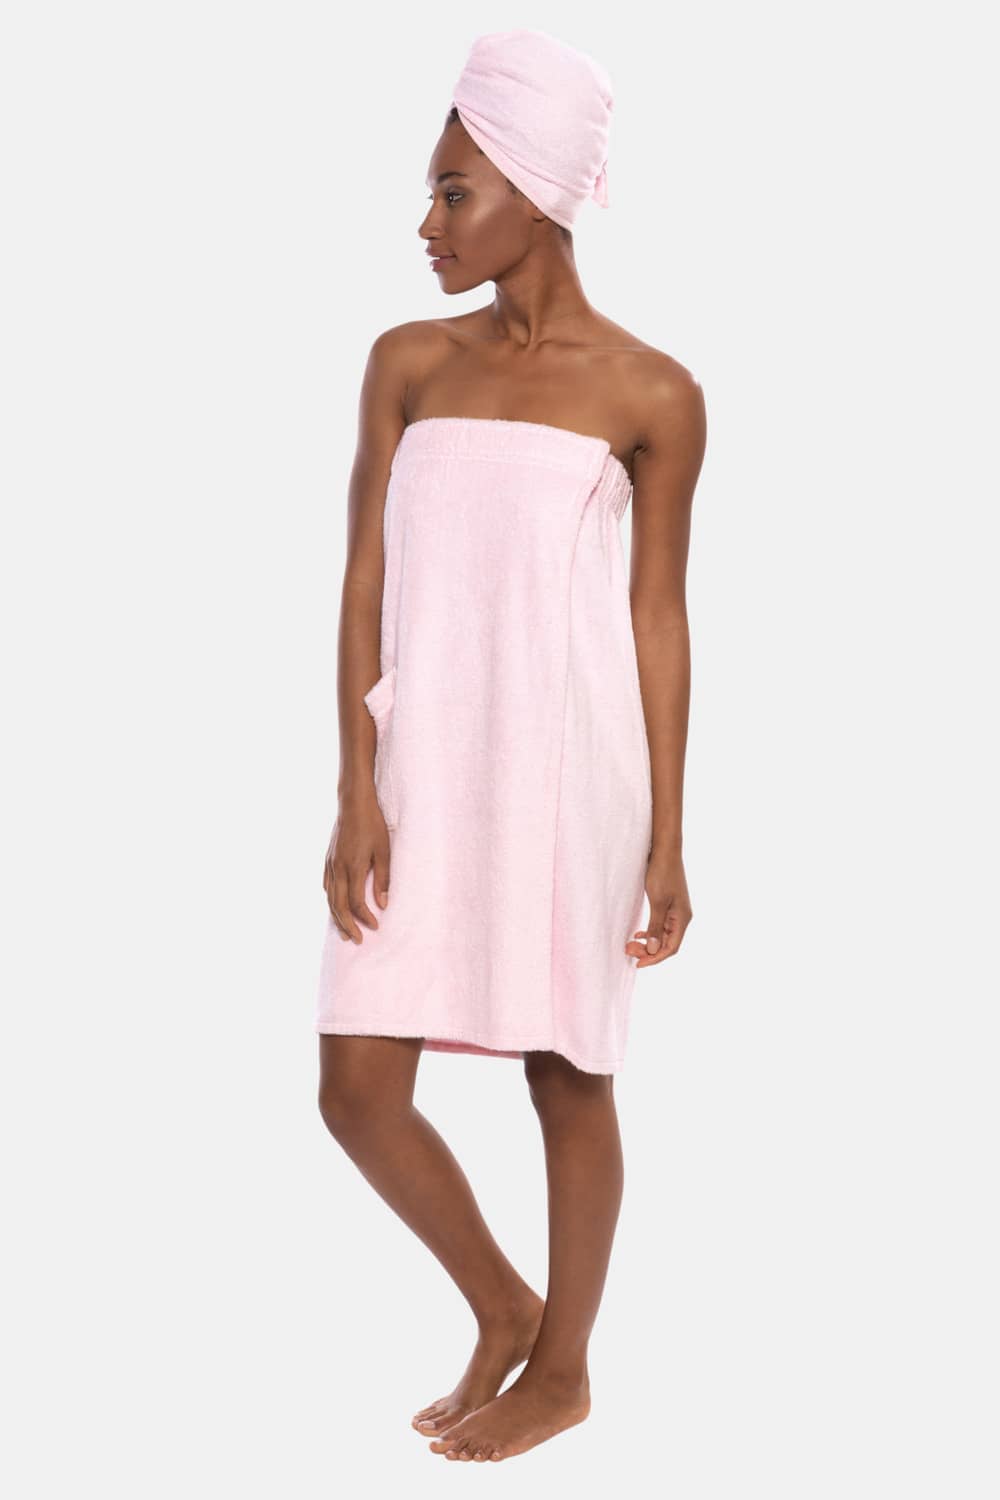 Texere Women's 2pc Terry Cloth Body and Hair Wrap Womens>Spa>Set Fishers Finery Barely Pink S/M 